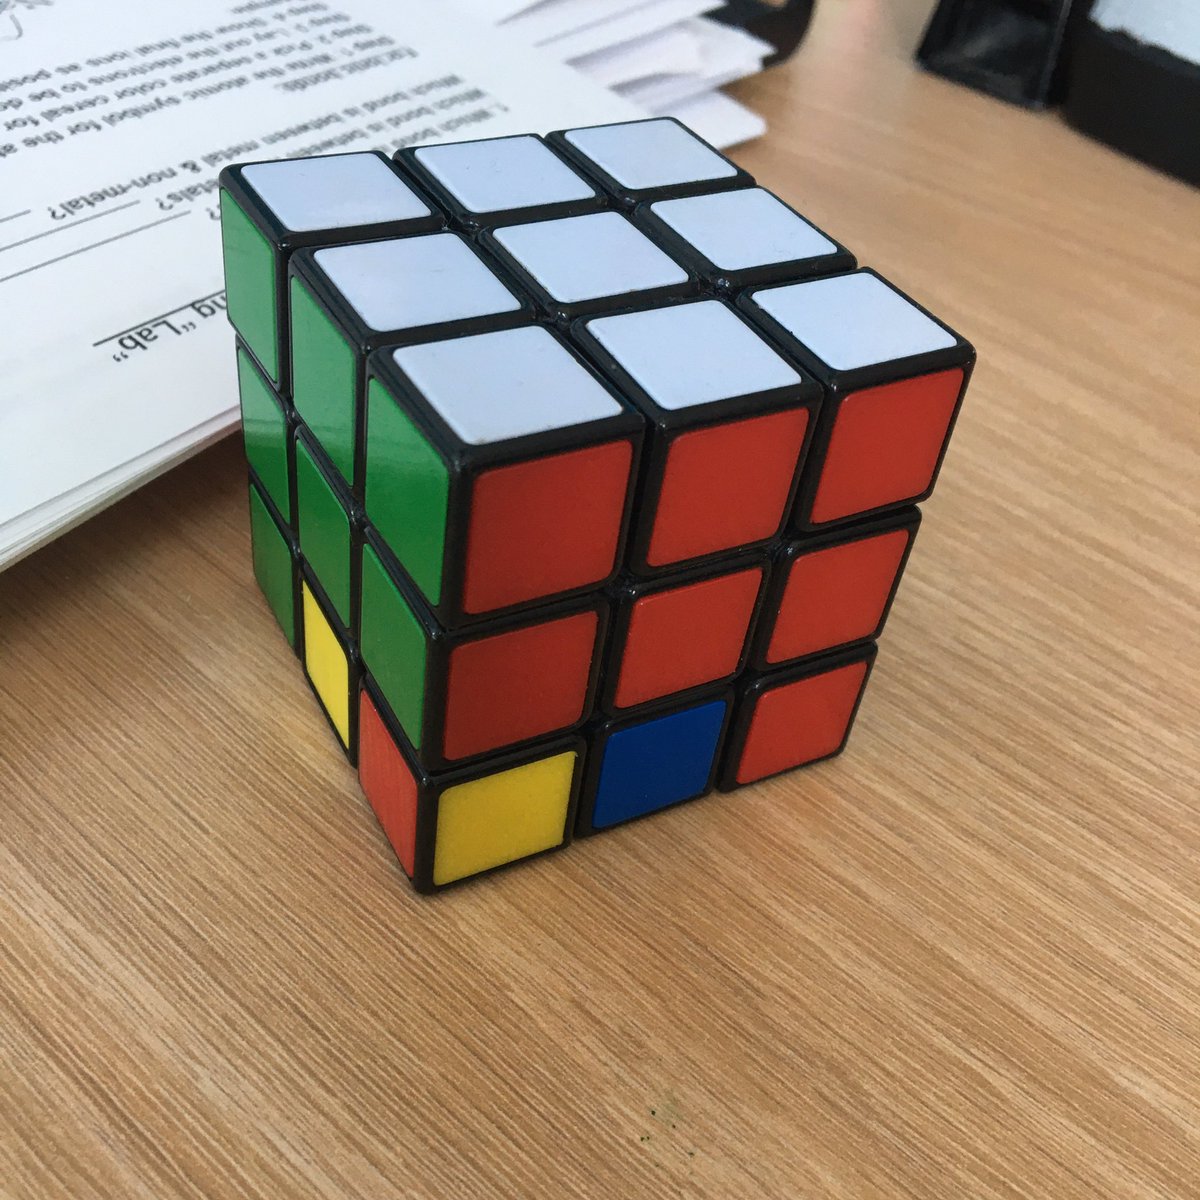 I challenged one of my students to try learning how to solve a Rubik’s Cube over spring break…looks like he’s almost got it! #whyiteach